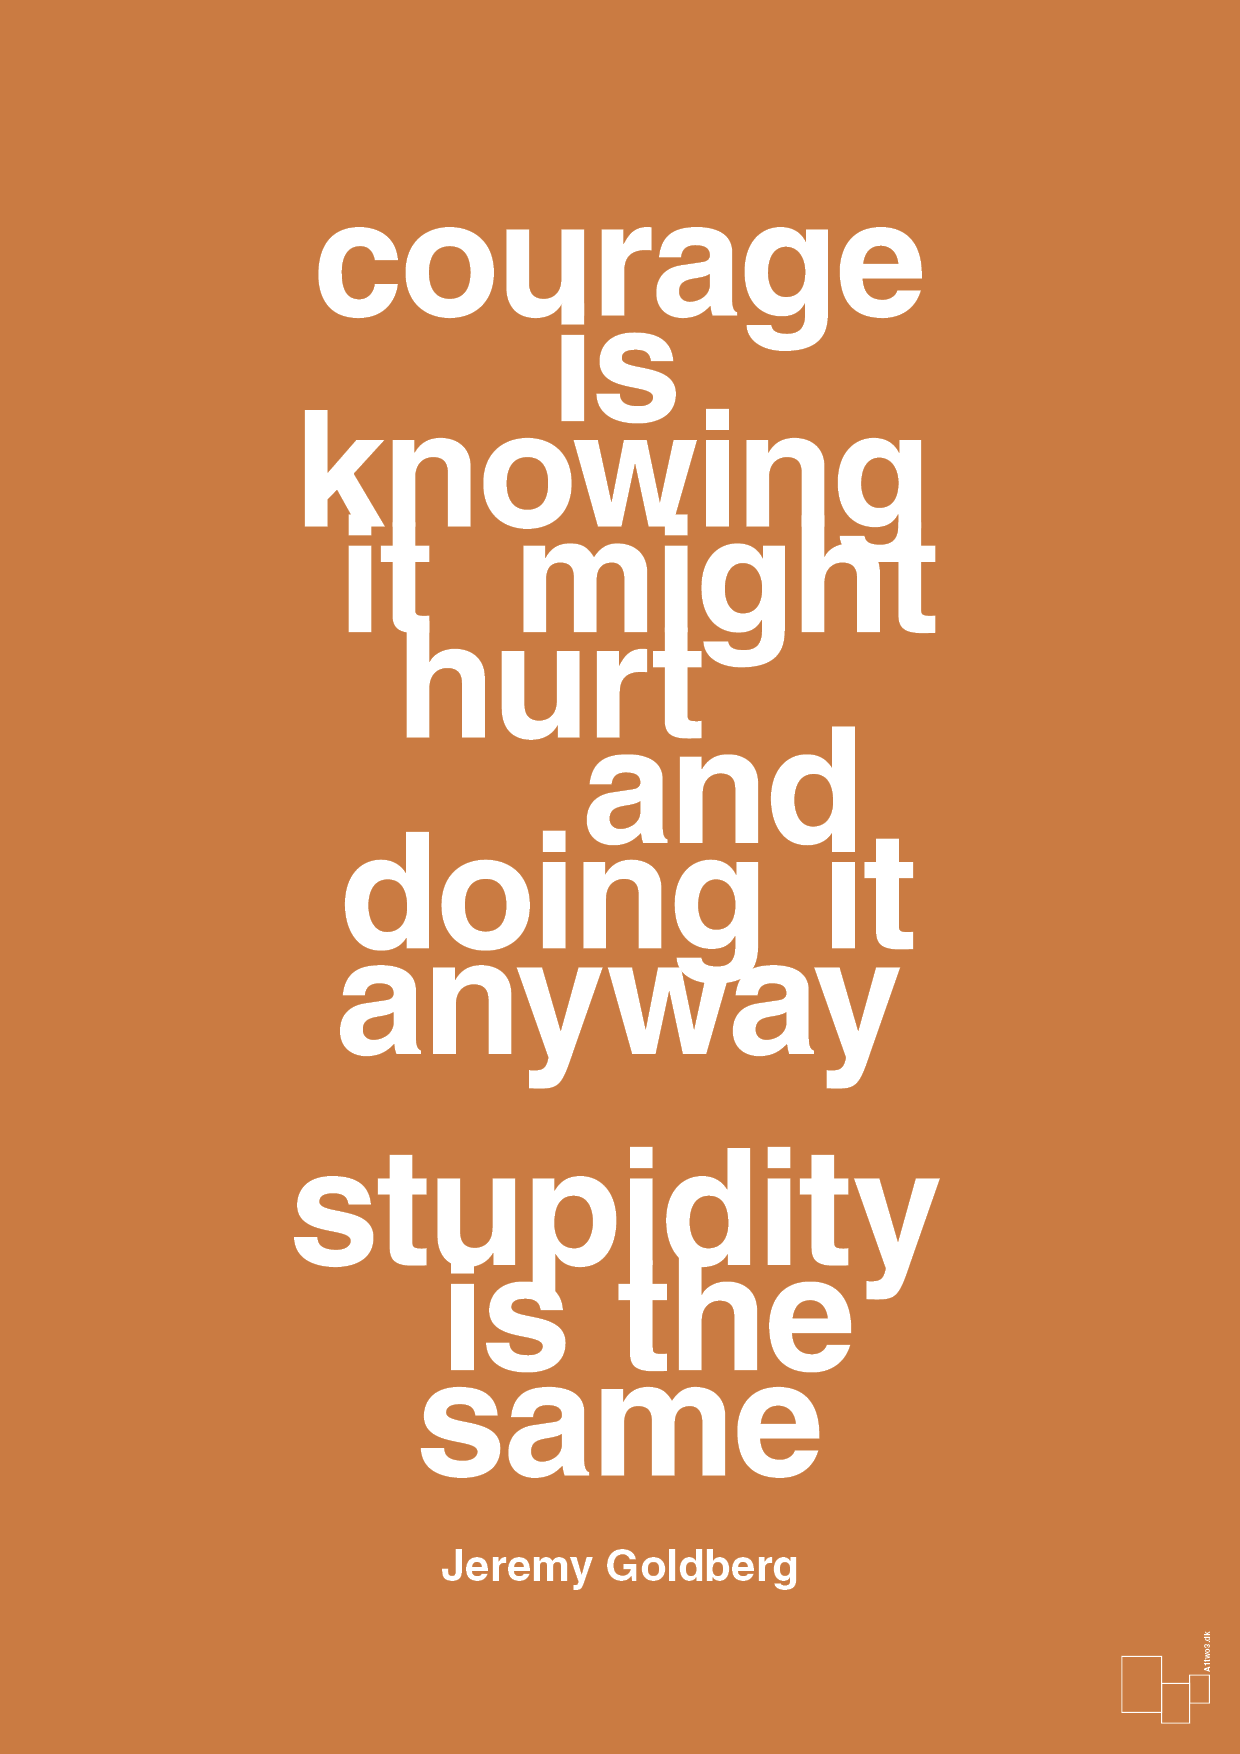 courage is knowing it might hurt and doing it anyway stupidity is the same - Plakat med Citater i Rumba Orange